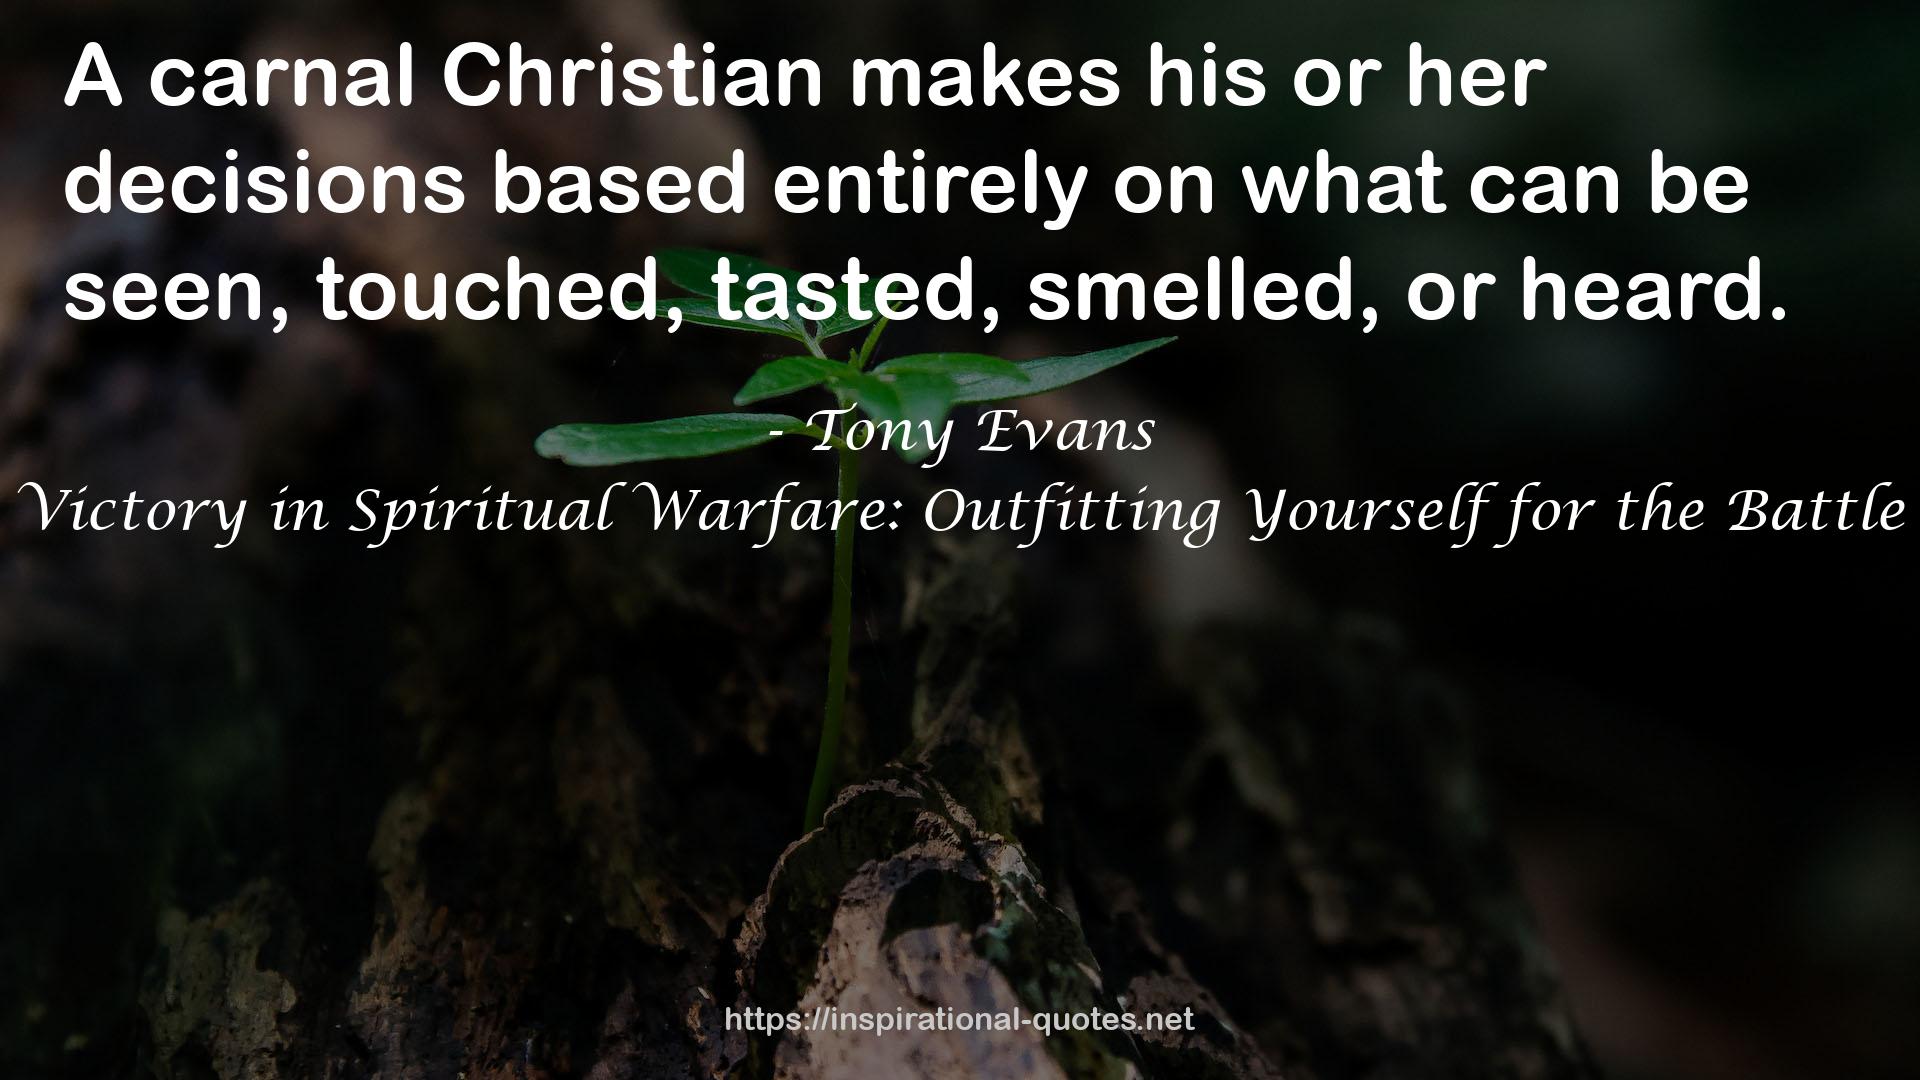 Victory in Spiritual Warfare: Outfitting Yourself for the Battle QUOTES